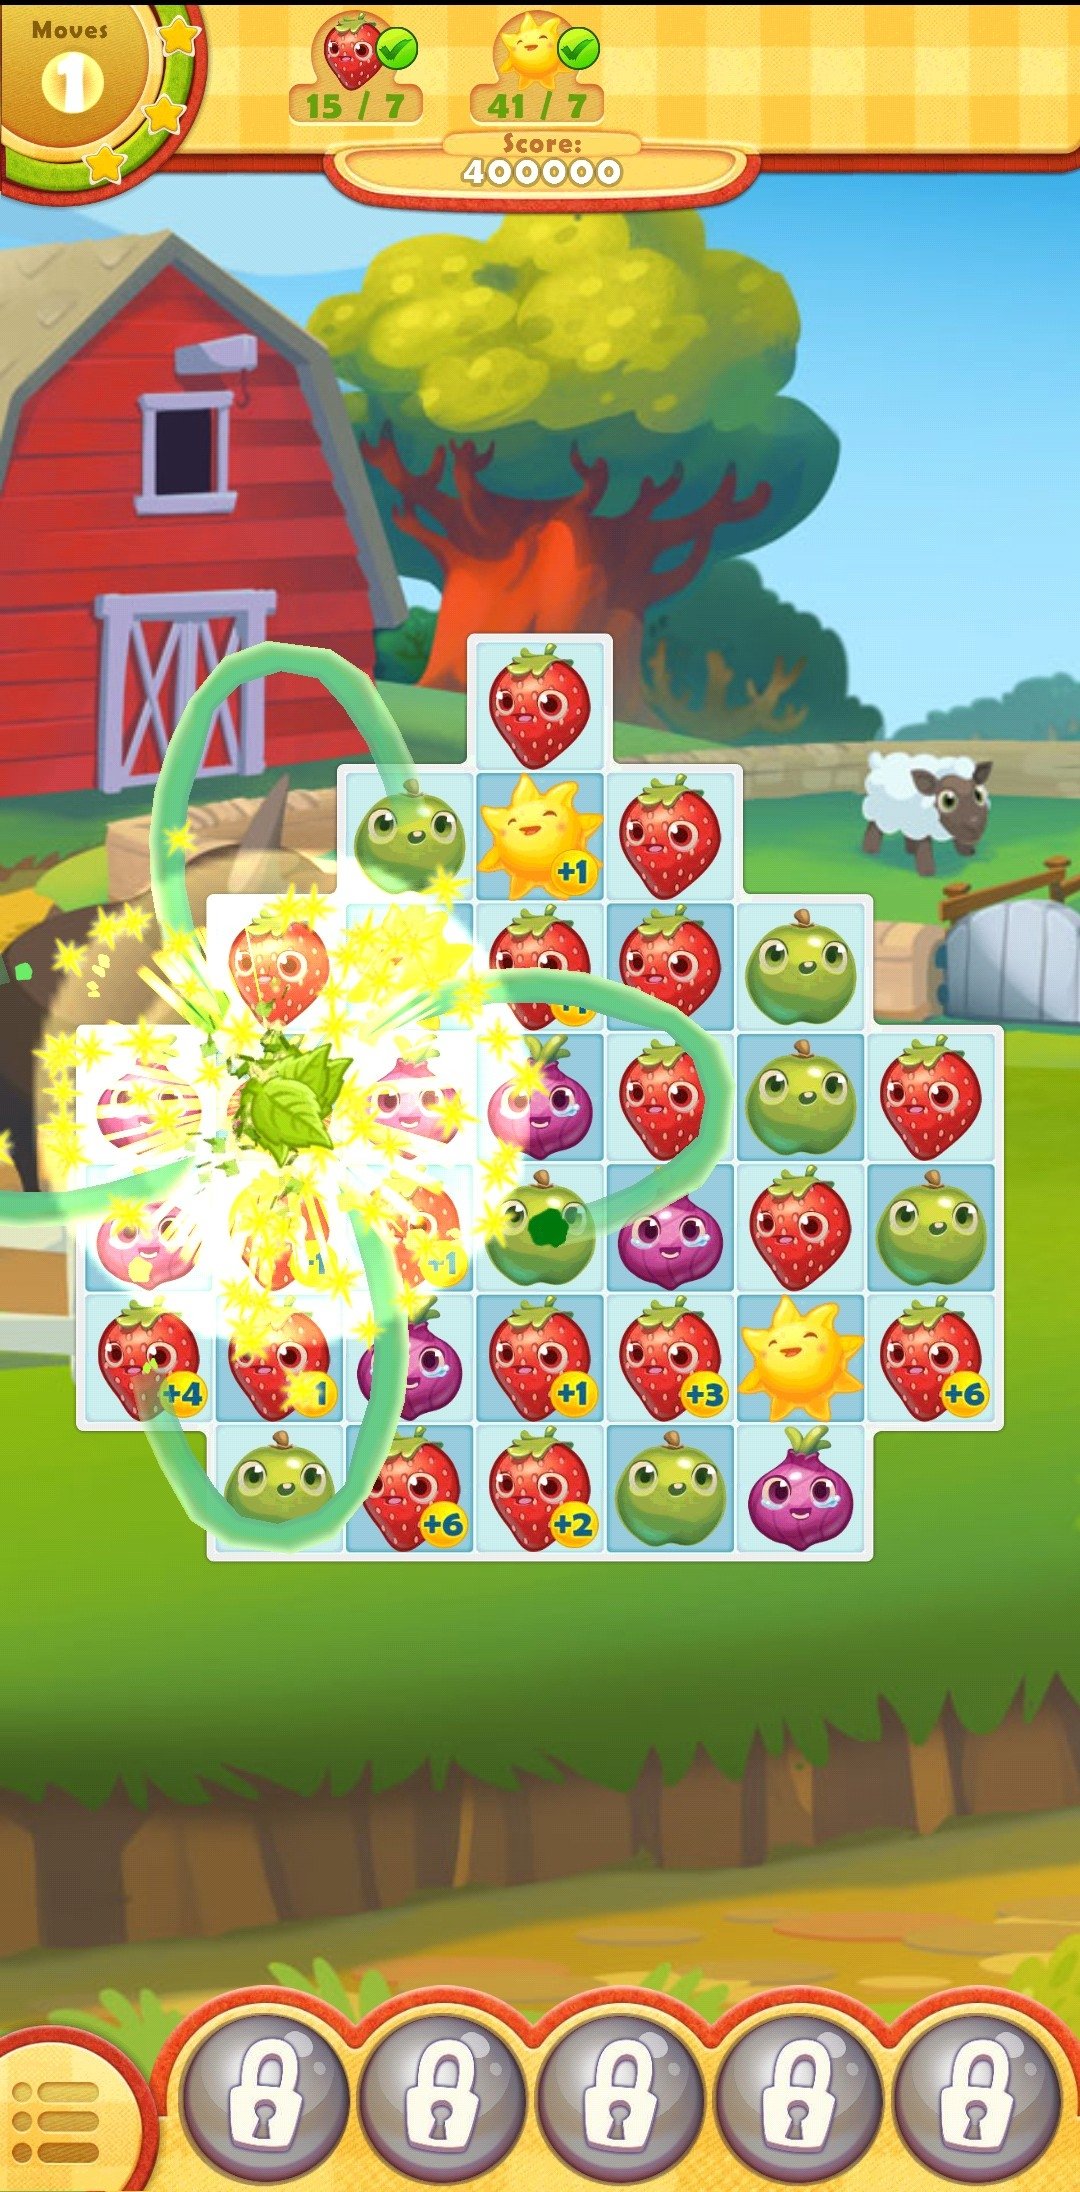 Farm Heroes Saga download the new version for iphone